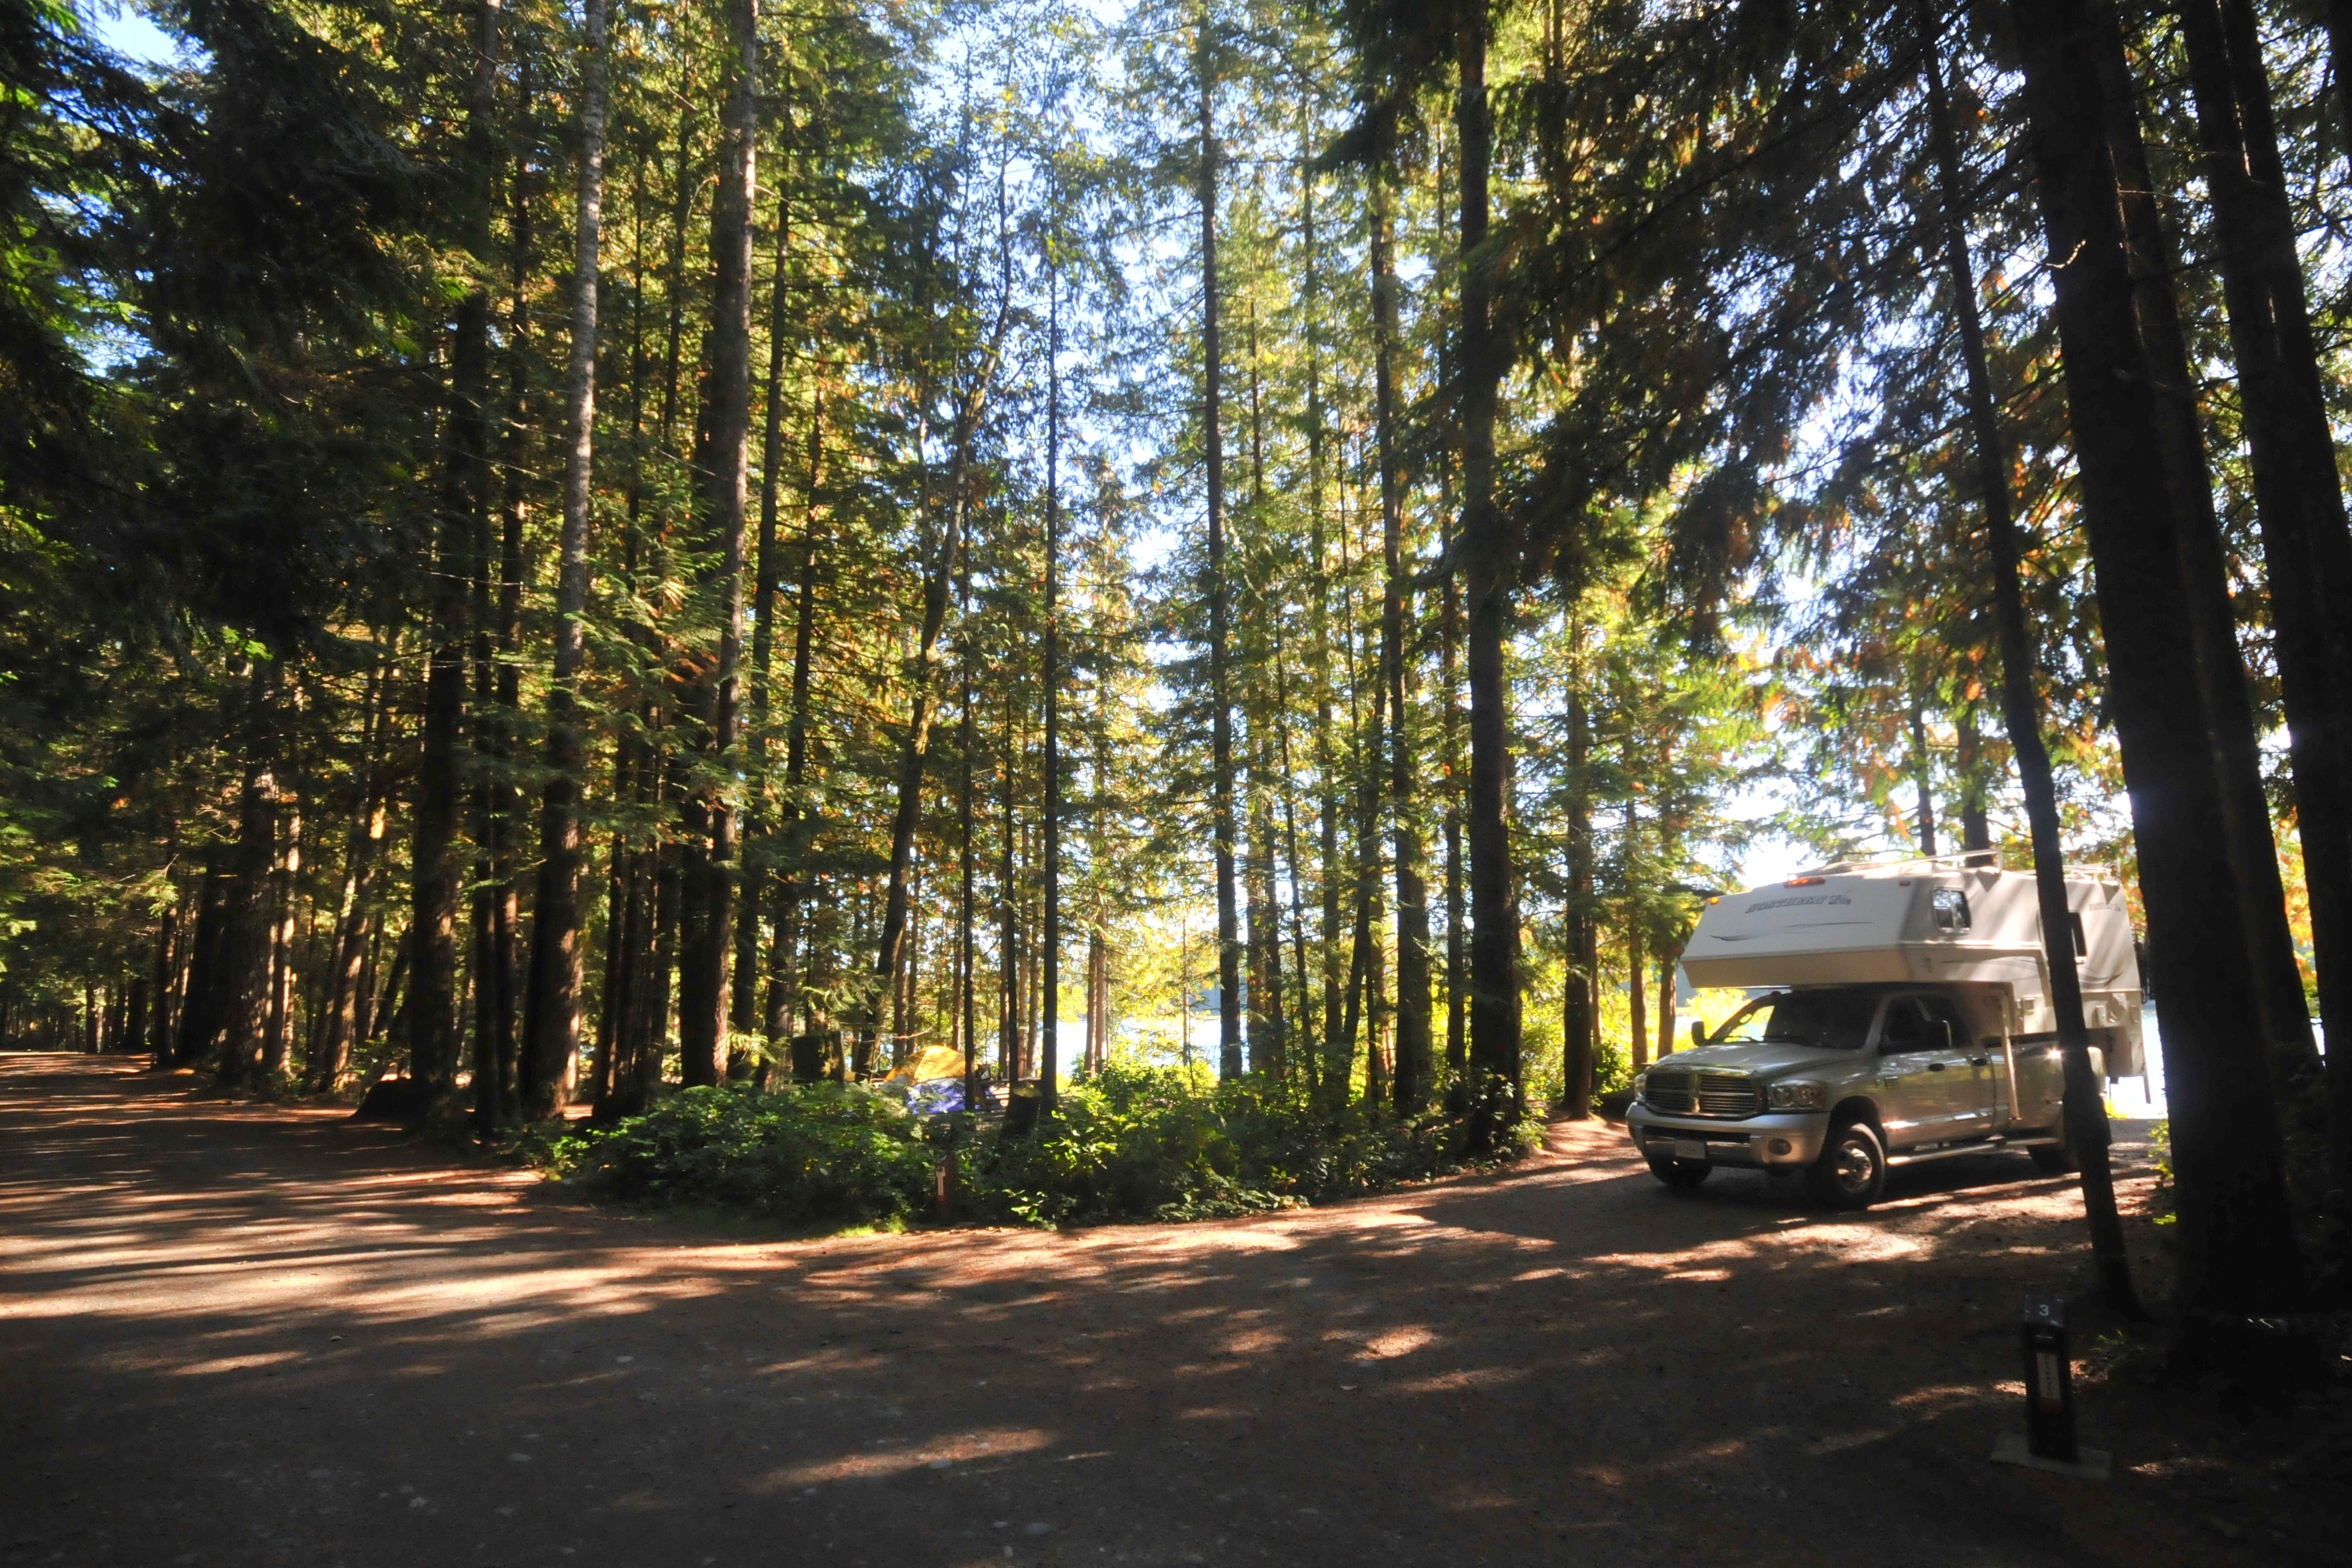 camping bc parks rving rv parks canada bc parks